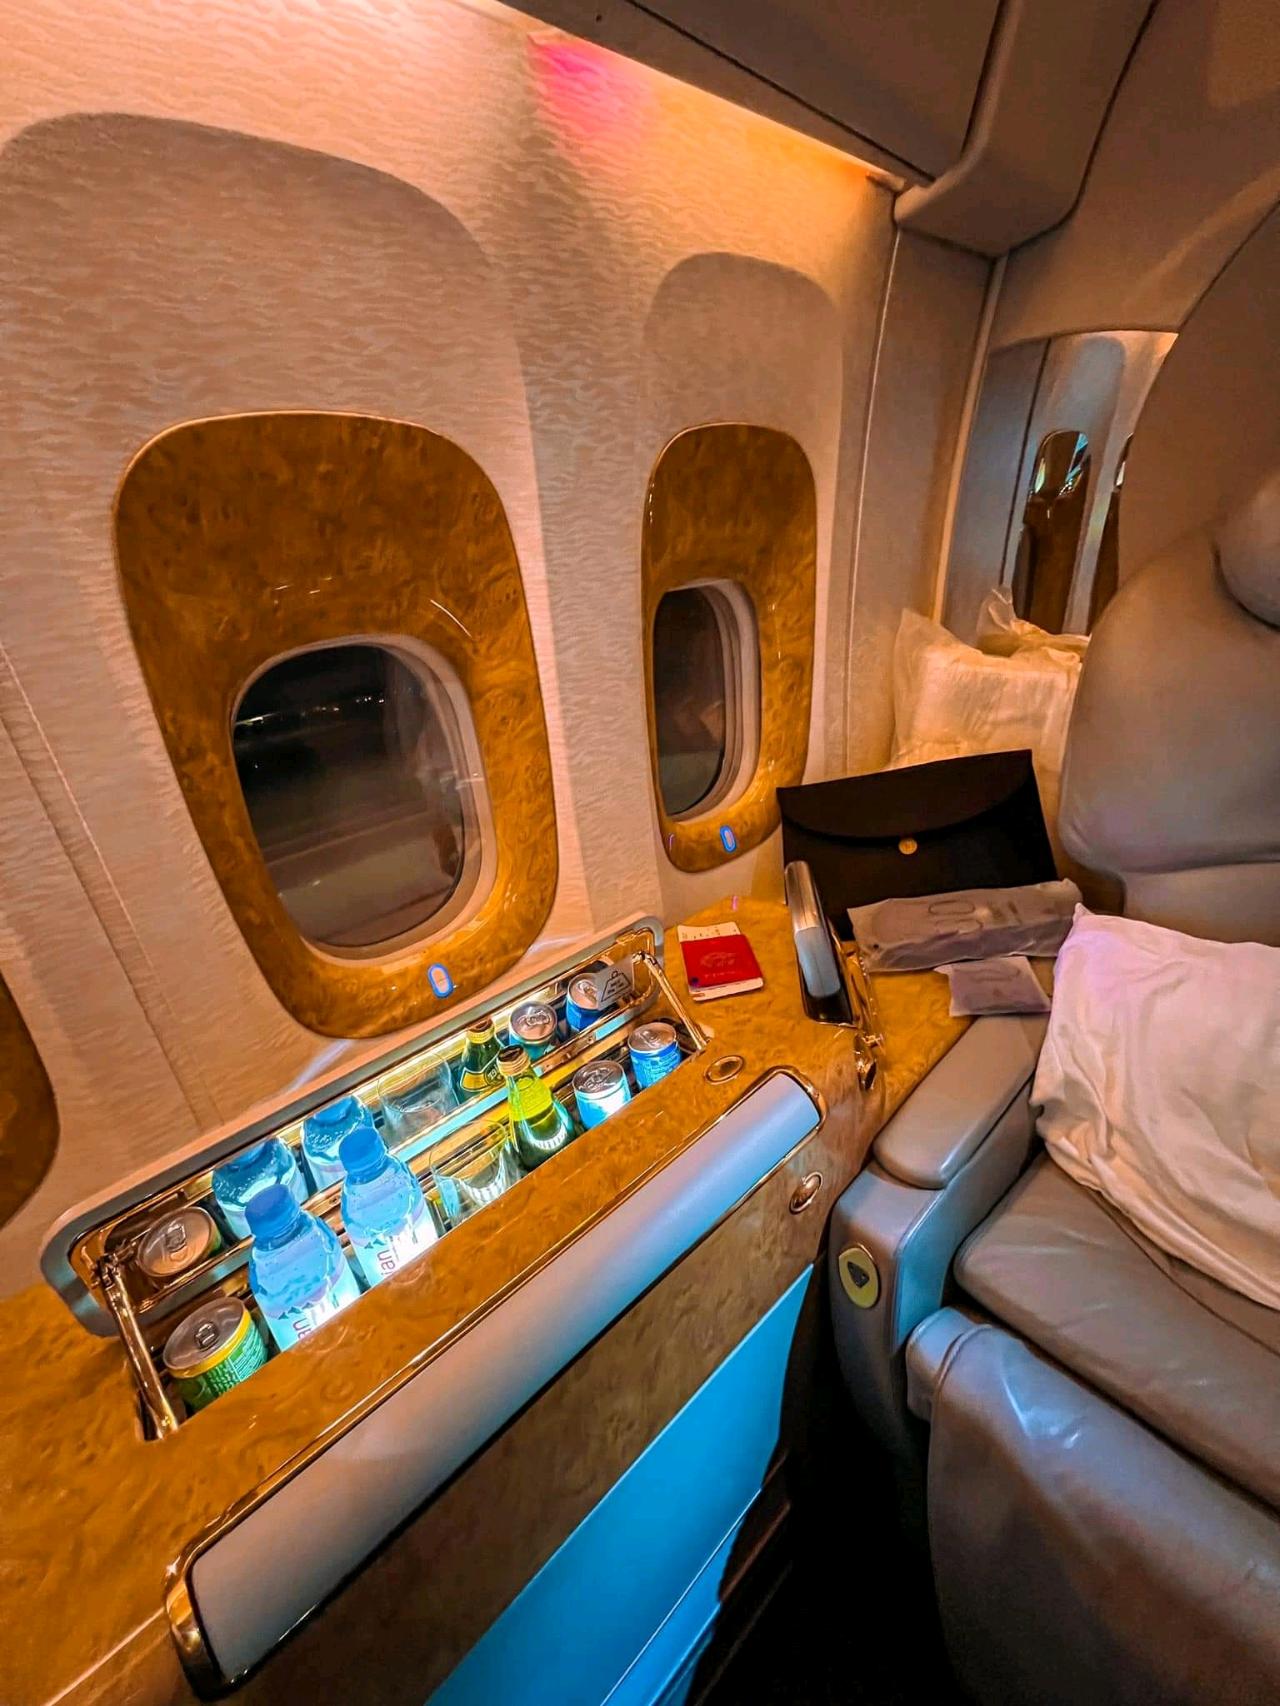 Emirates First Class B777 Malaysia to USA First class: 8 Private Suites / Business class: 42 angle flat seats / Economy class: 310 seats Bag: 32kg x 2pc + 7kg x